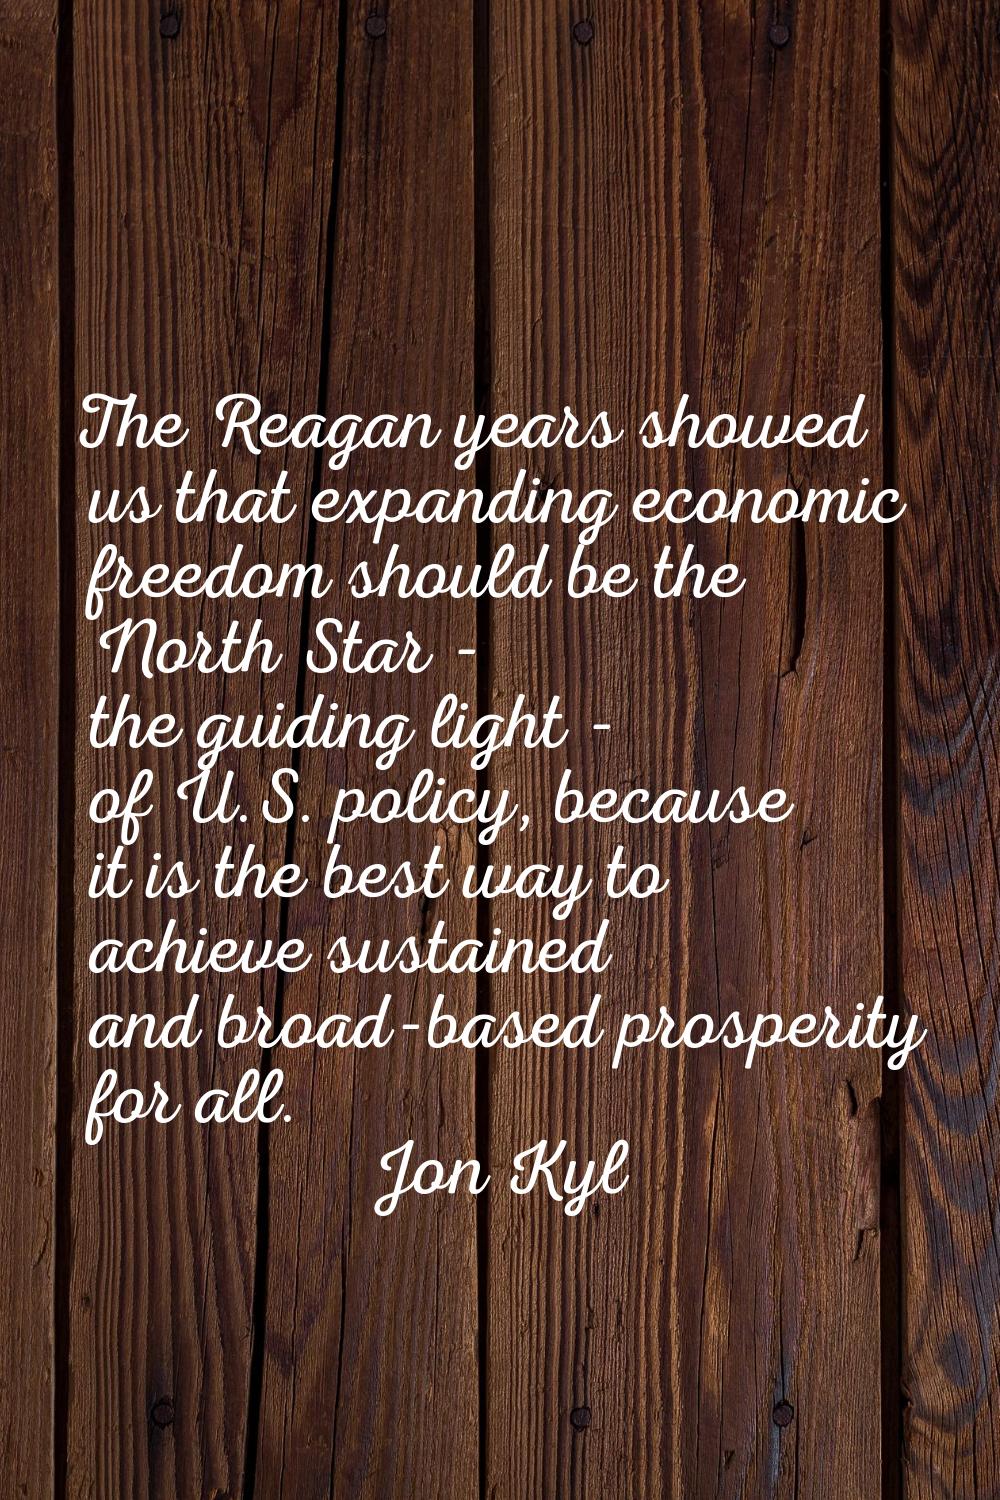 The Reagan years showed us that expanding economic freedom should be the North Star - the guiding l